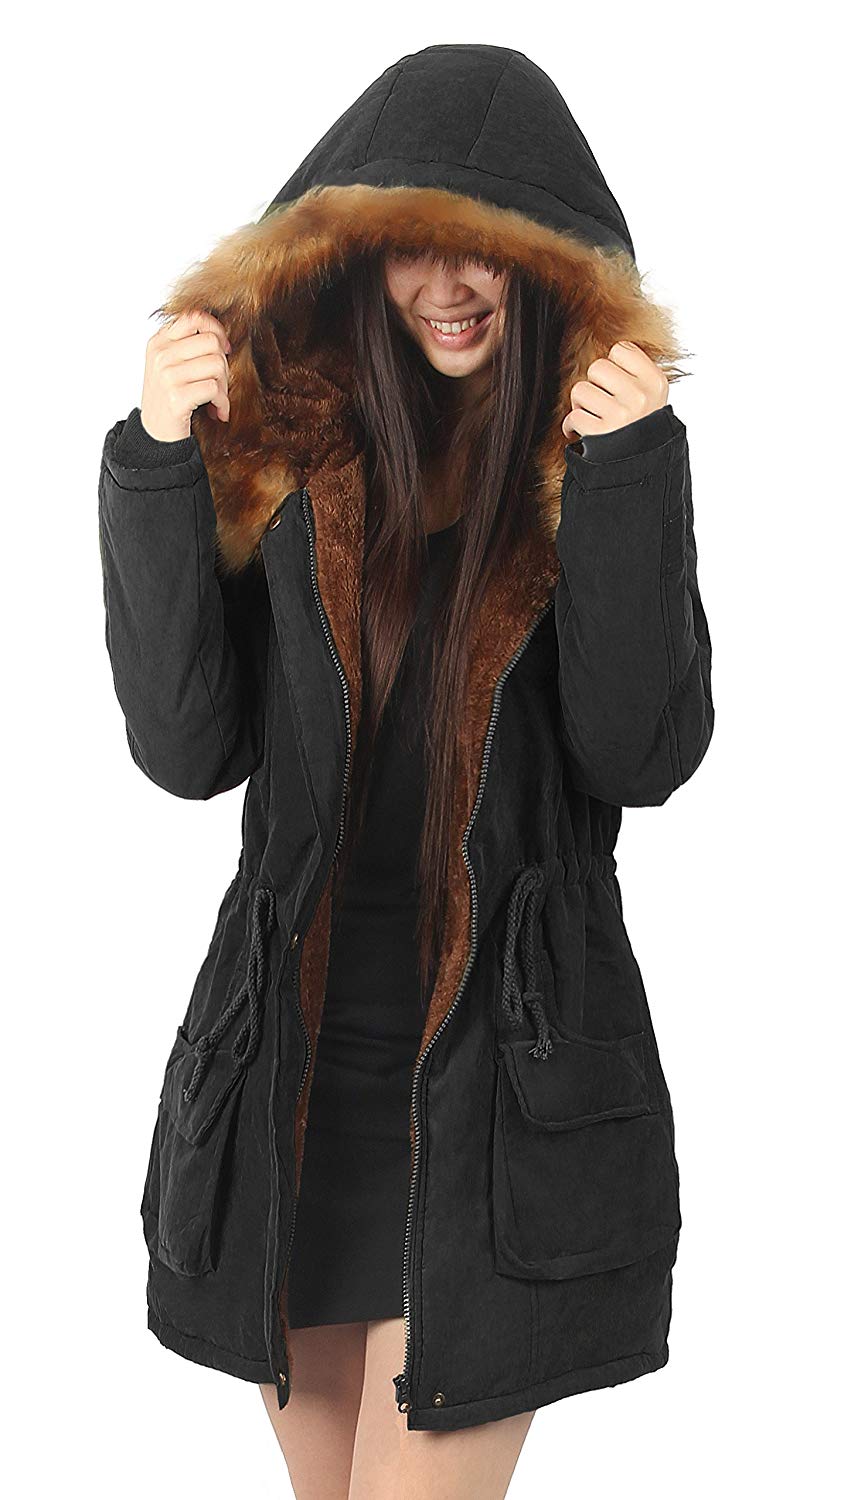 winter coats amazon.com: ilovesia womens hooded warm coats parkas with faux fur jackets:  clothing PBYDPIT